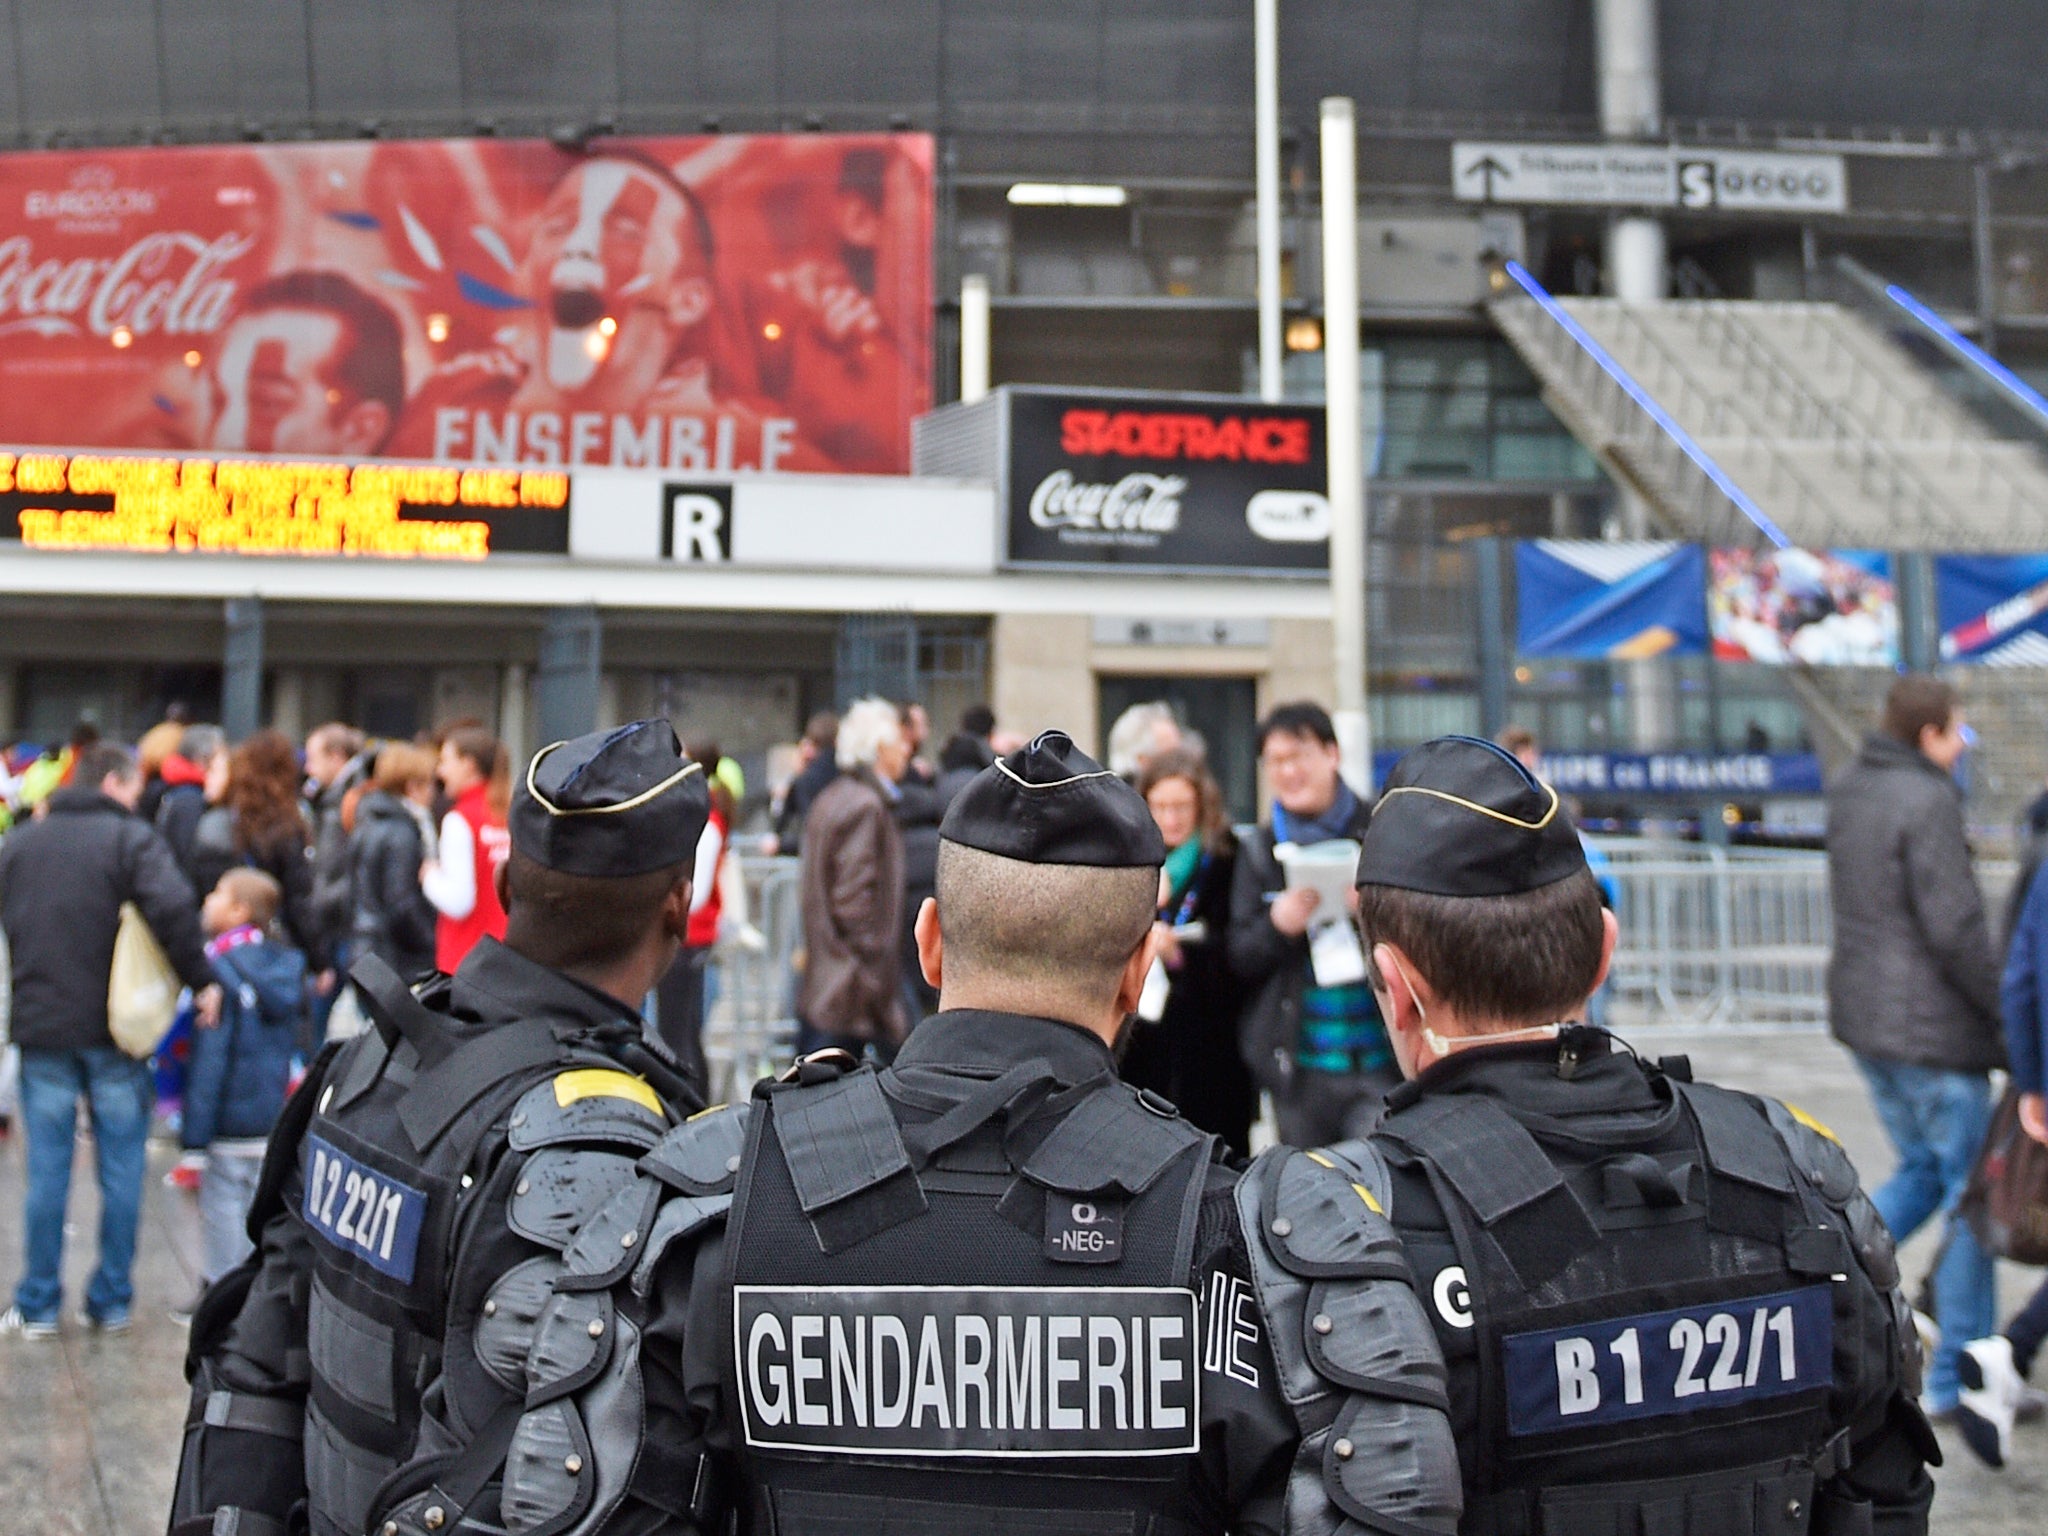 Security personnel outside the Stade de France – where the Euro 2016 will get underway from on 10 June